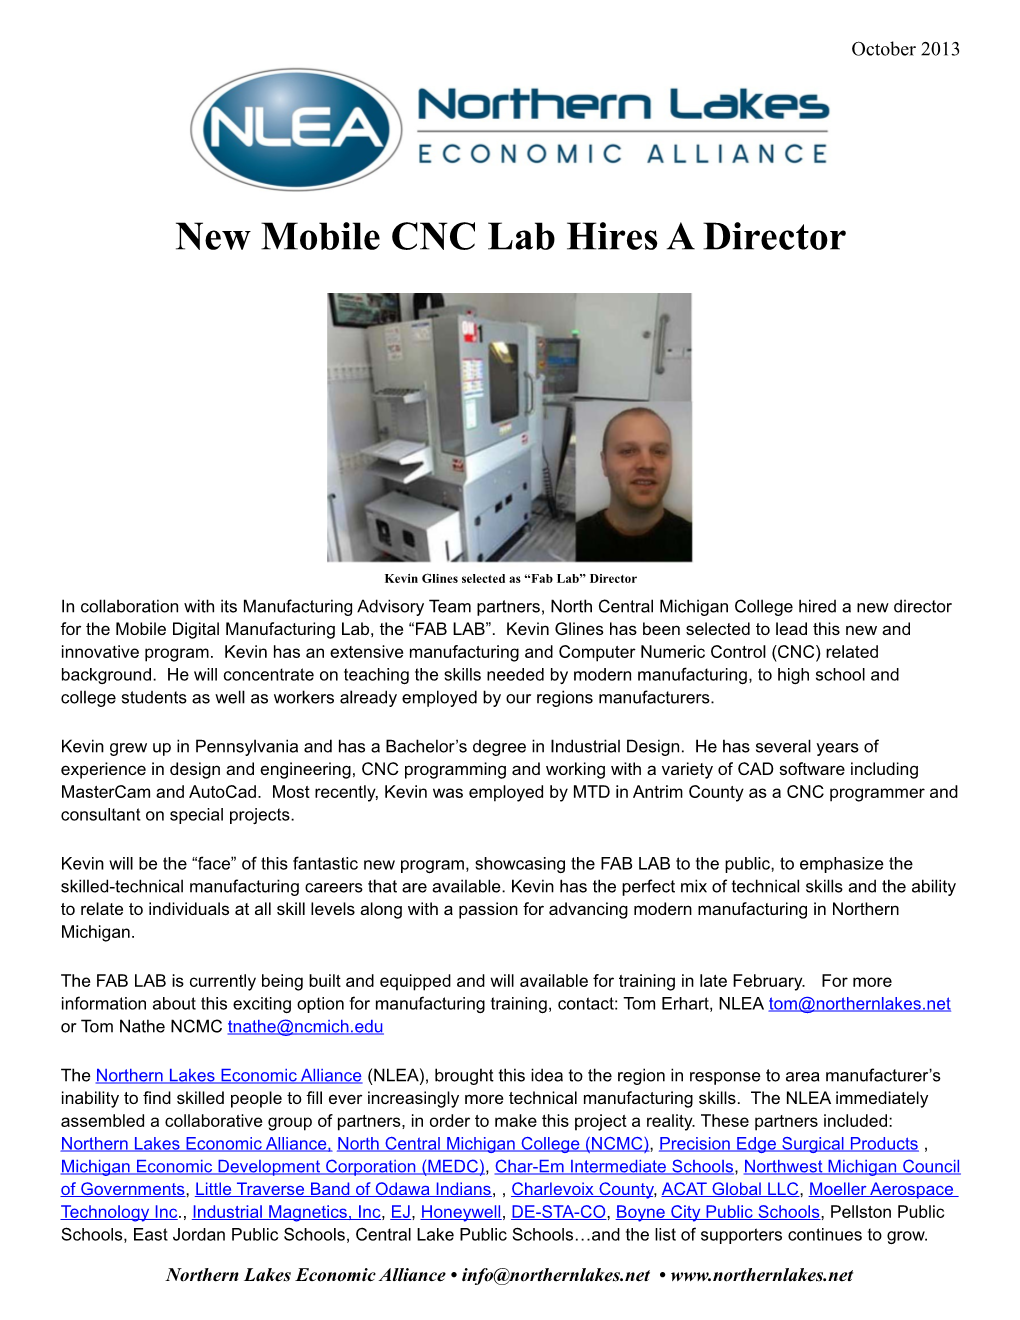 New Mobile CNC Lab Hires a Director Kevin Glines Selected As Fab Lab Director